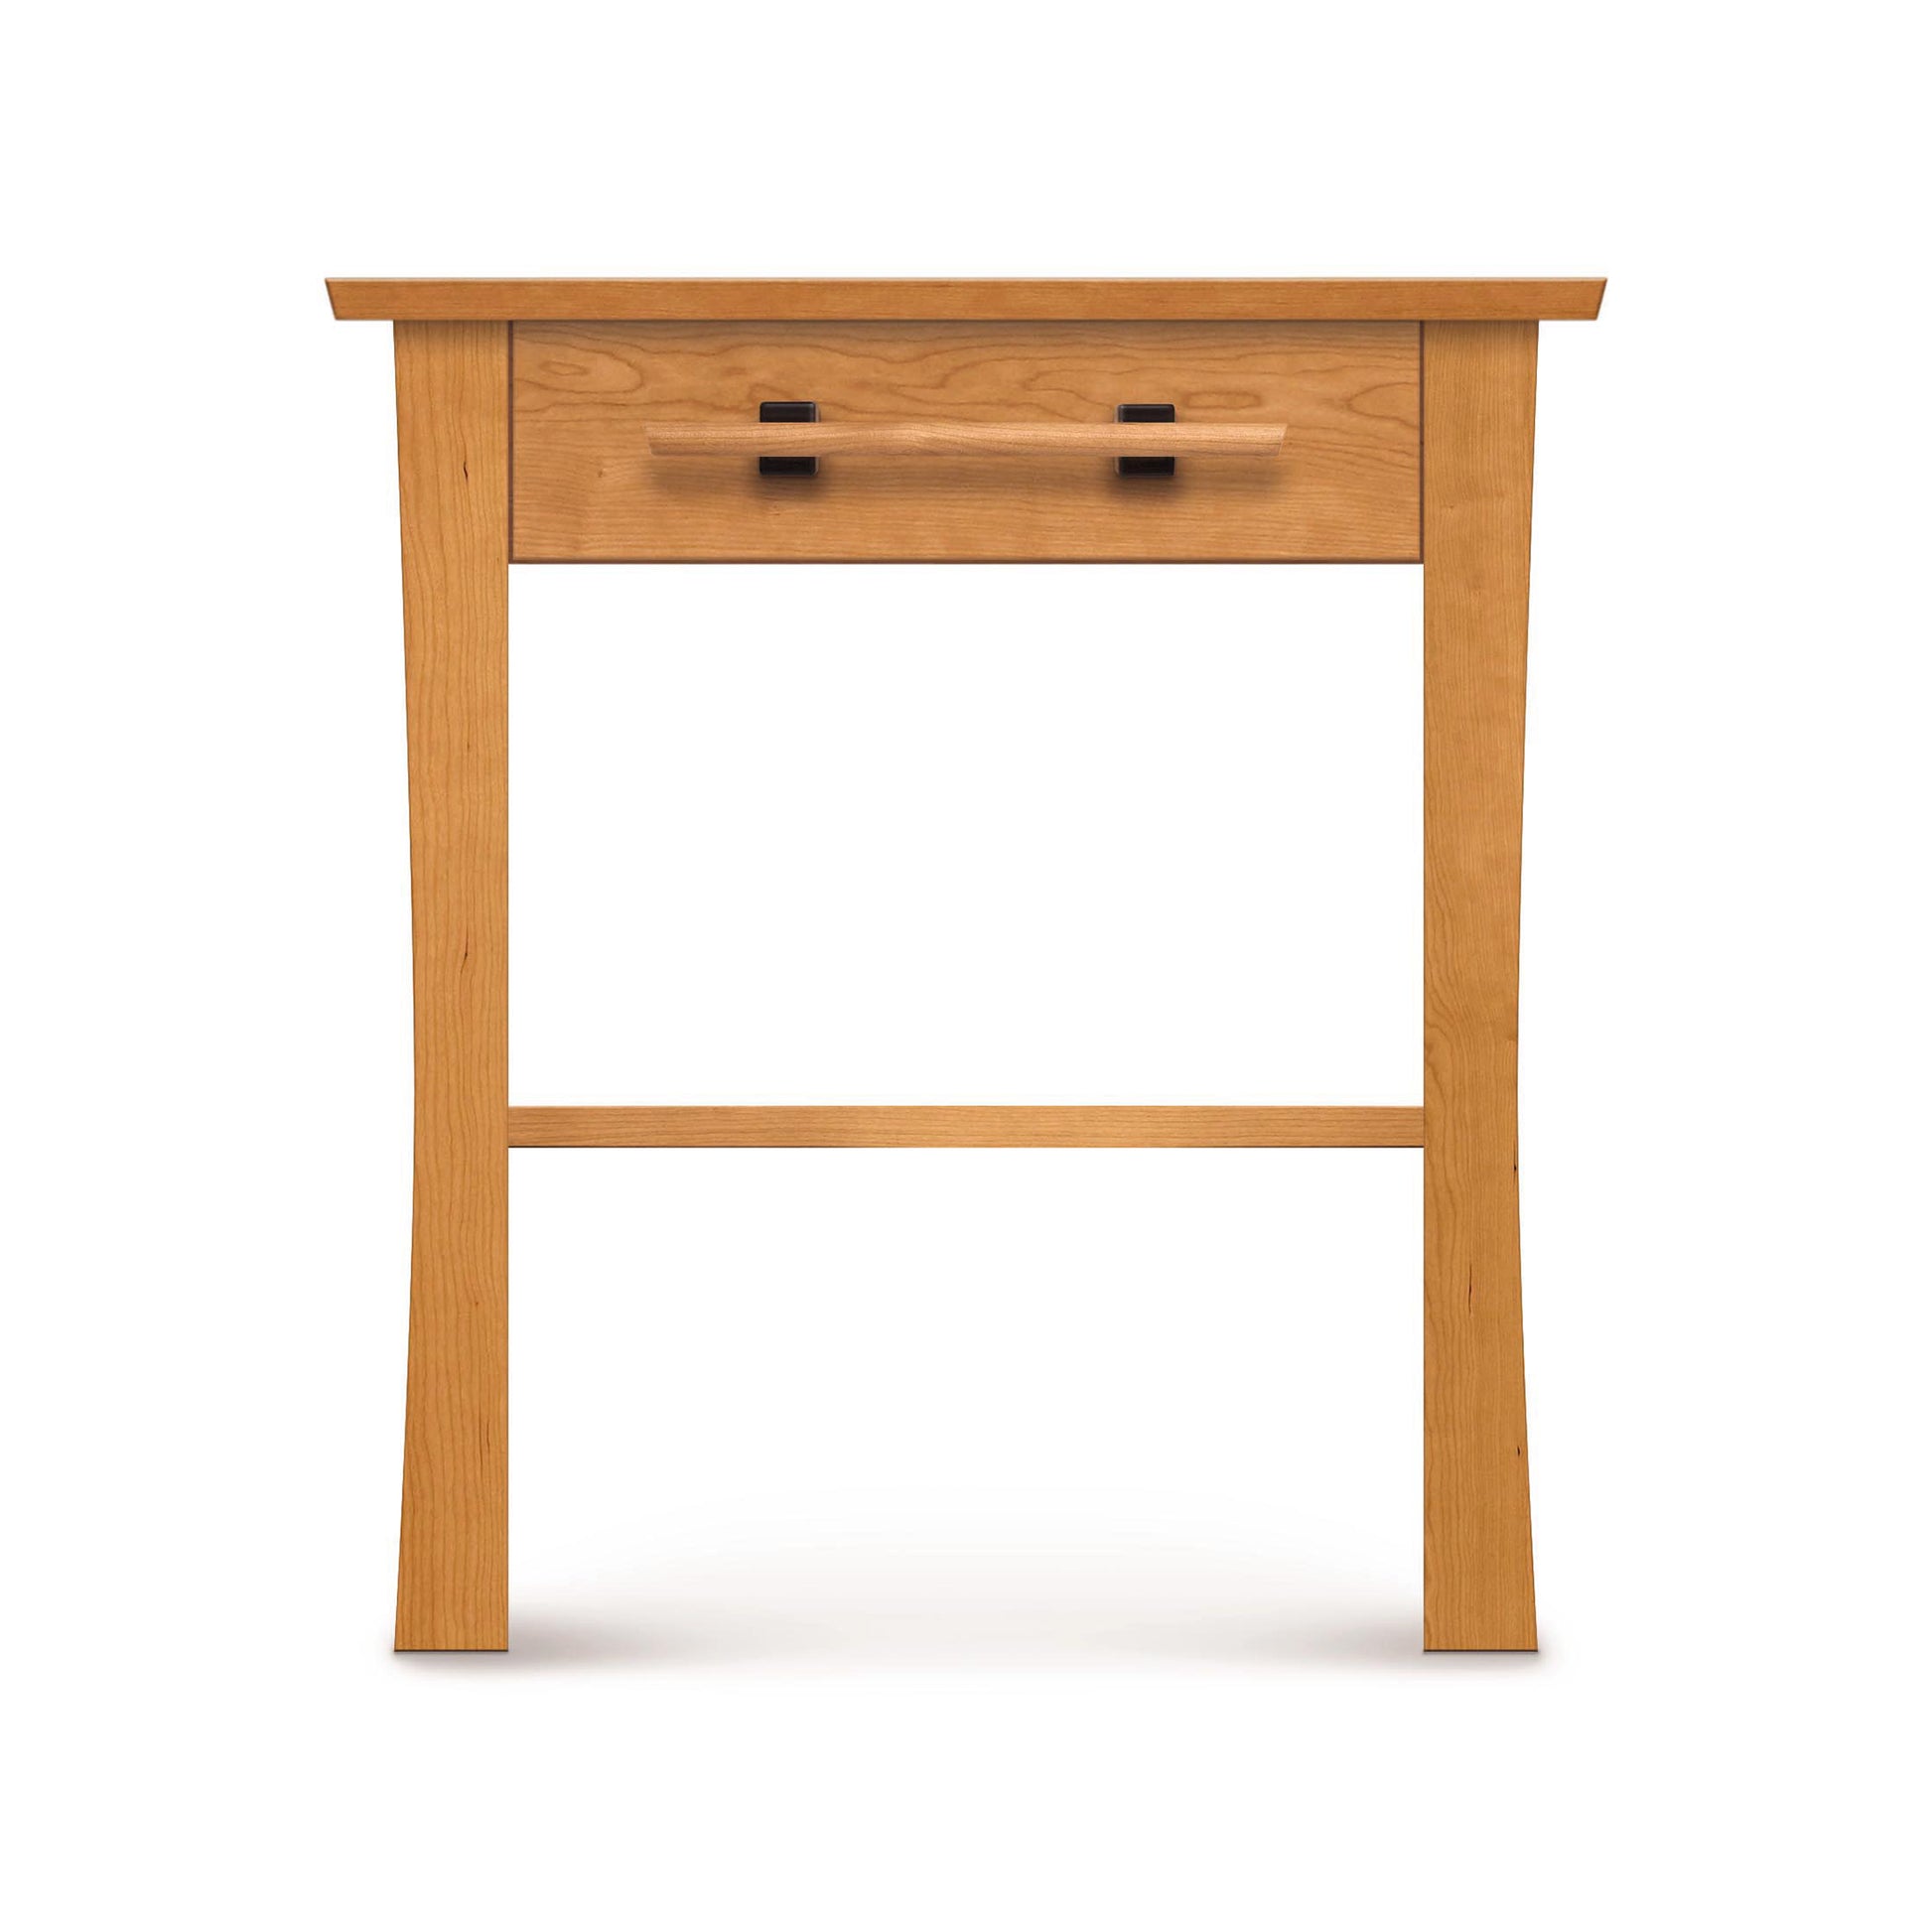 A Monterey 1-Drawer Nightstand handmade by Copeland Furniture in Vermont with a drawer on top.